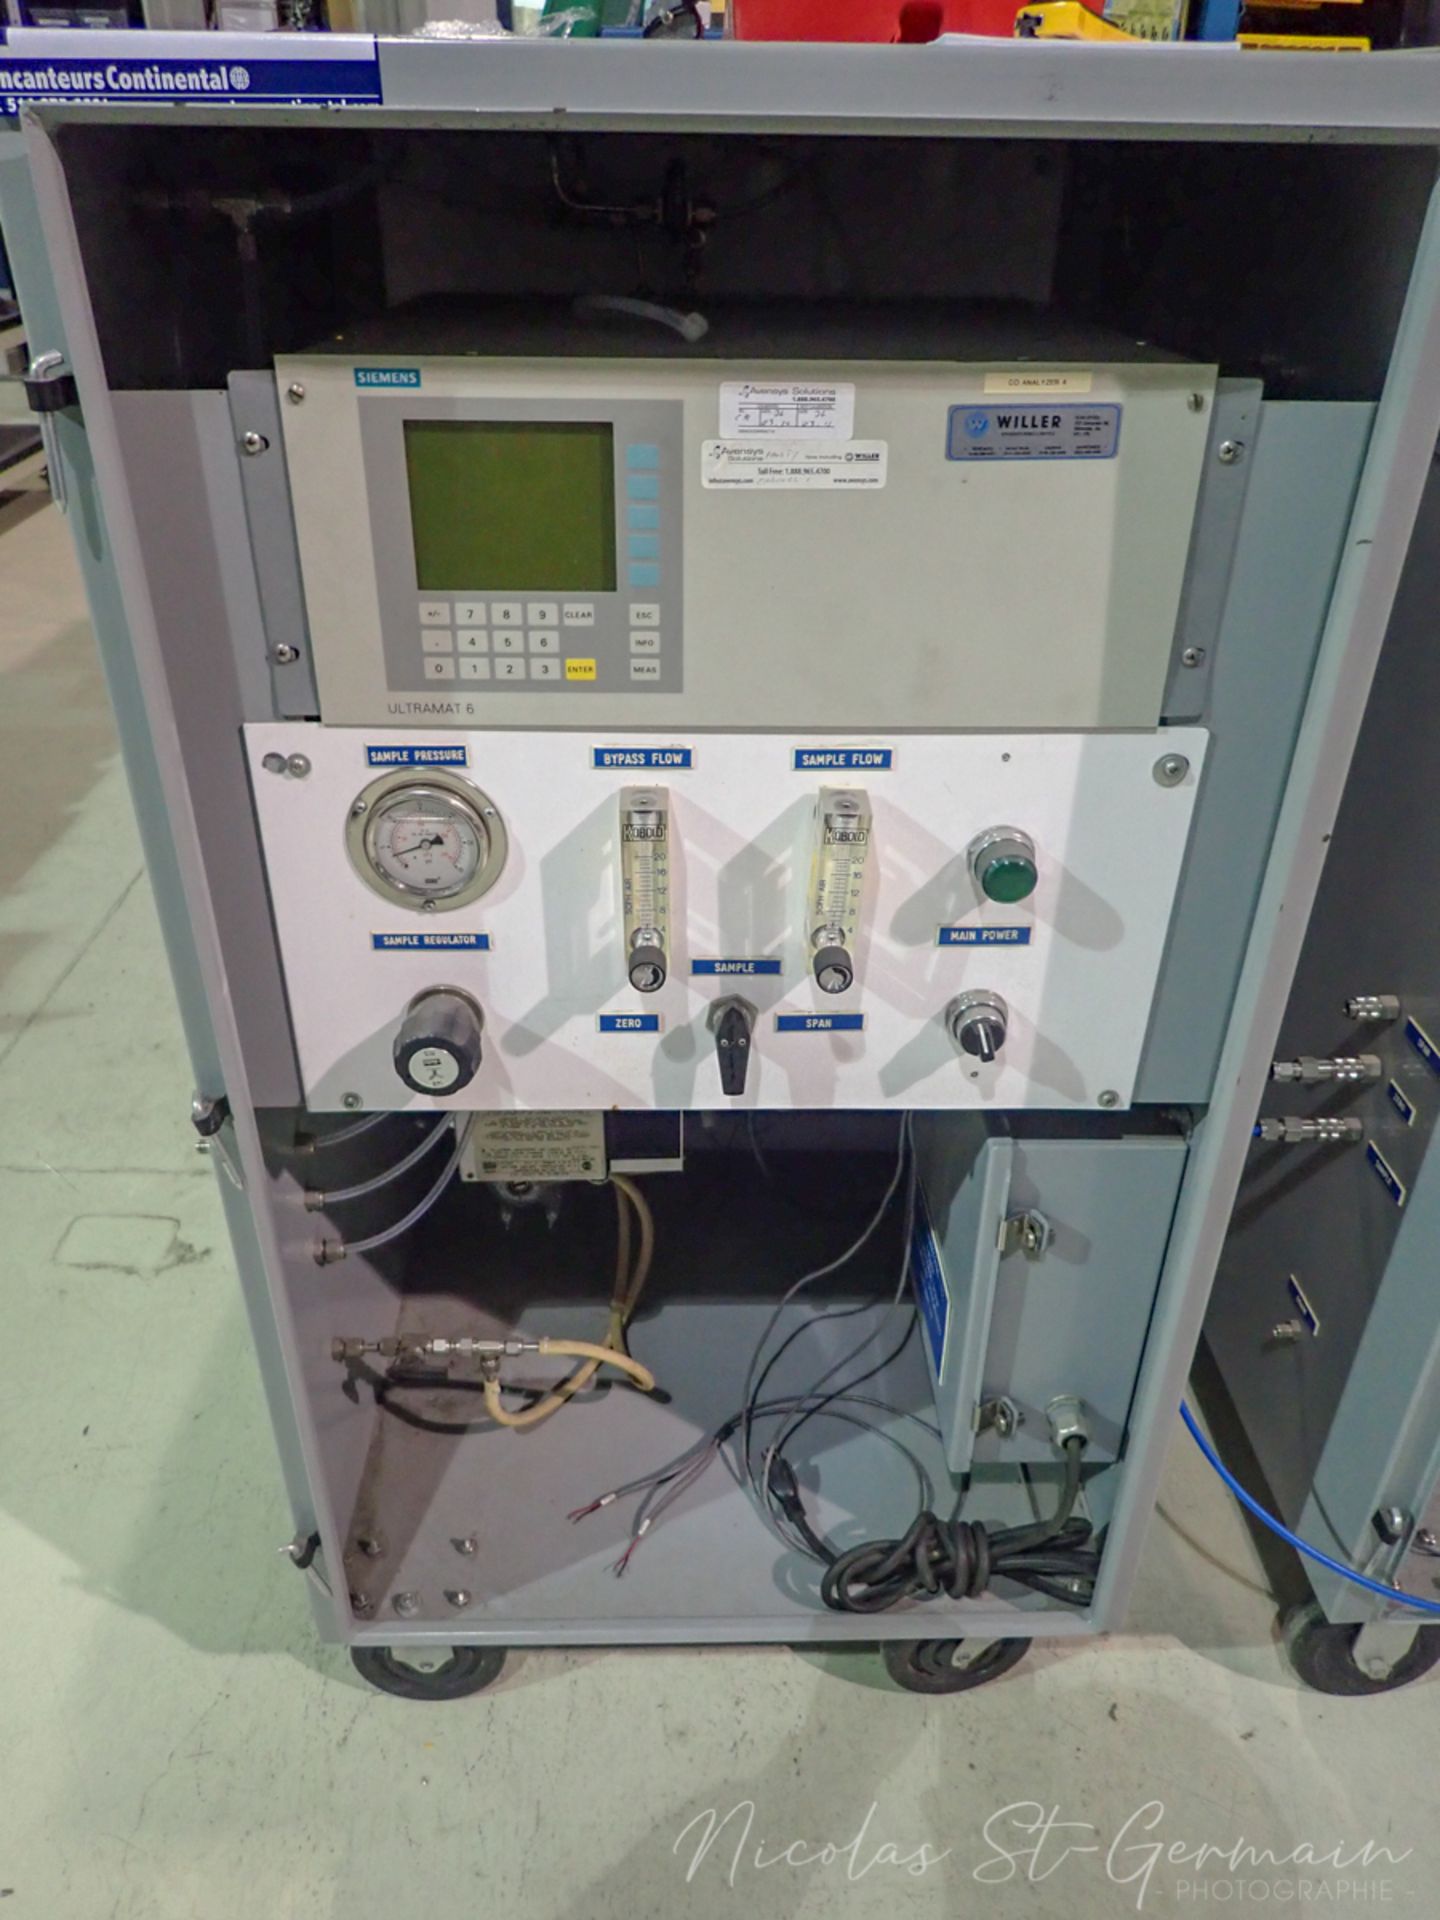 WILLER ENGINEERING H-POWER CO MONITORING SYSTEM